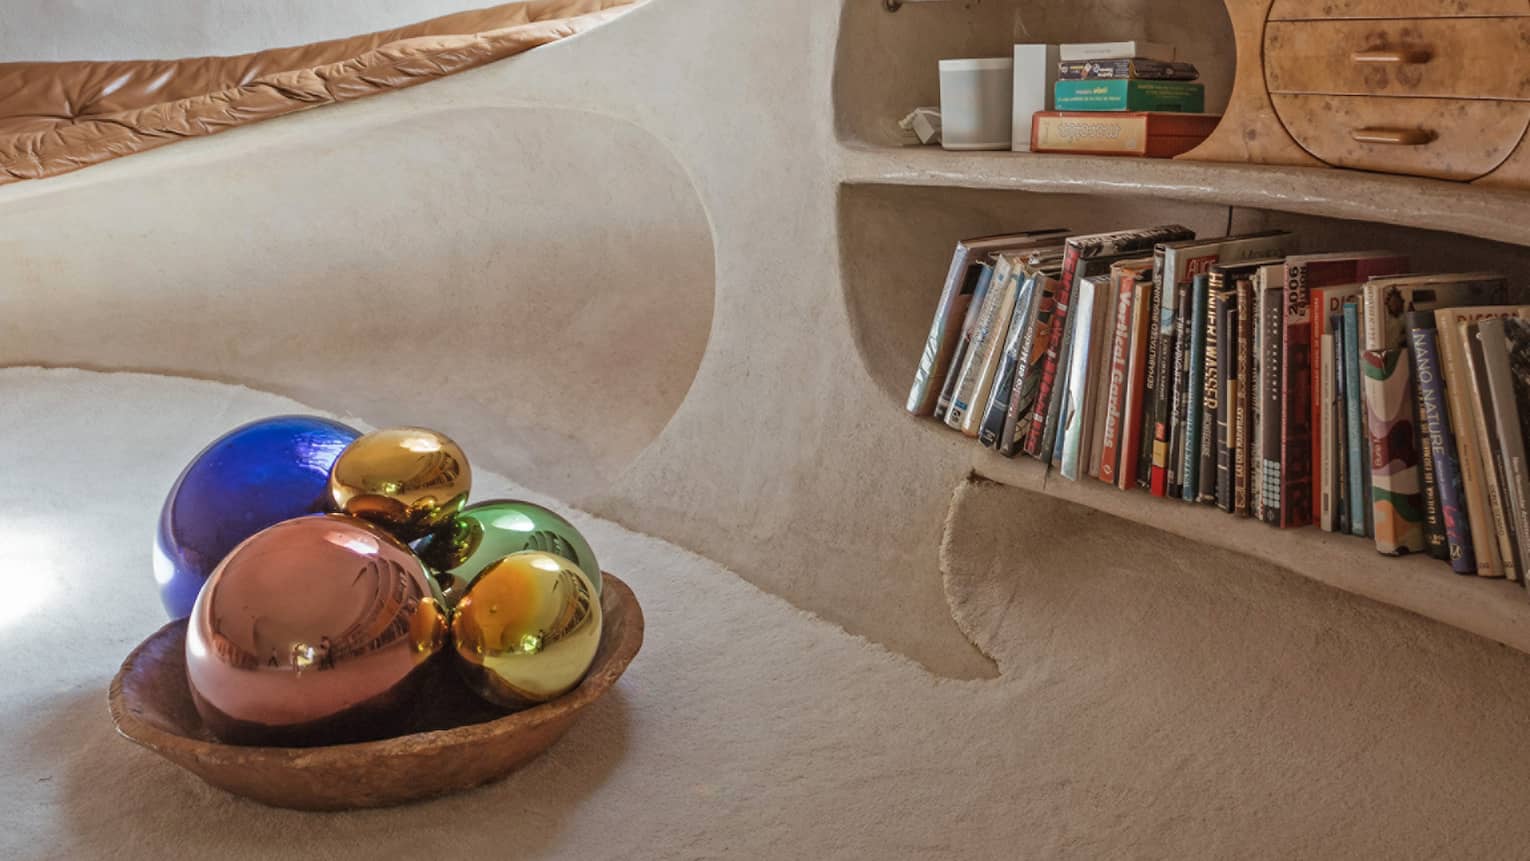 Aside a bowl of colourful orbs, shelves carved into a curved, adobe wall feature books, curios and inlaid wooden drawers. 